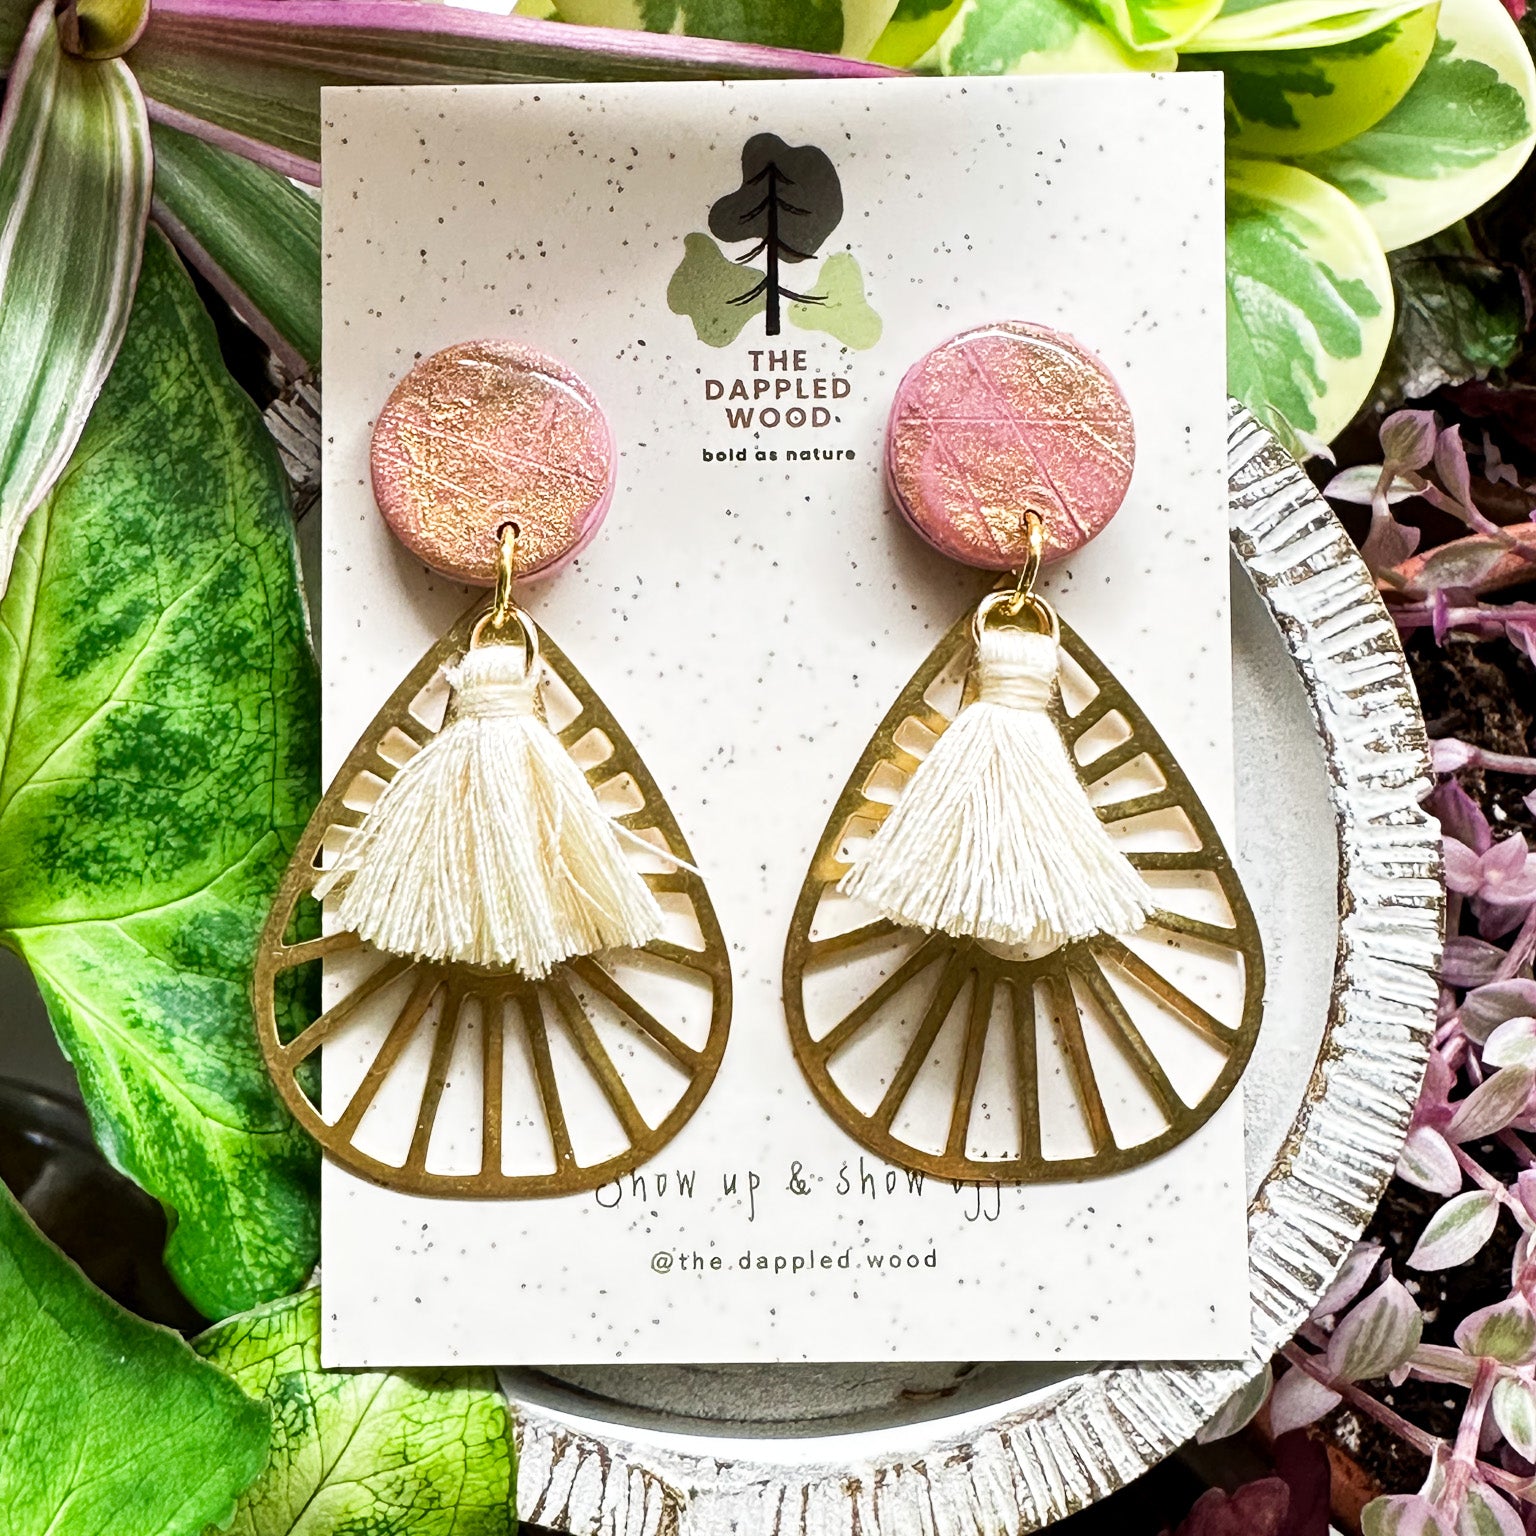 Handcrafted polymer clay earrings named 'Willa', showcasing a sparkling pink circular top with an openwork gold fan design and delicate tassels, presented against a speckled card with The Dappled Wood logo, surrounded by vibrant green and pink plants.